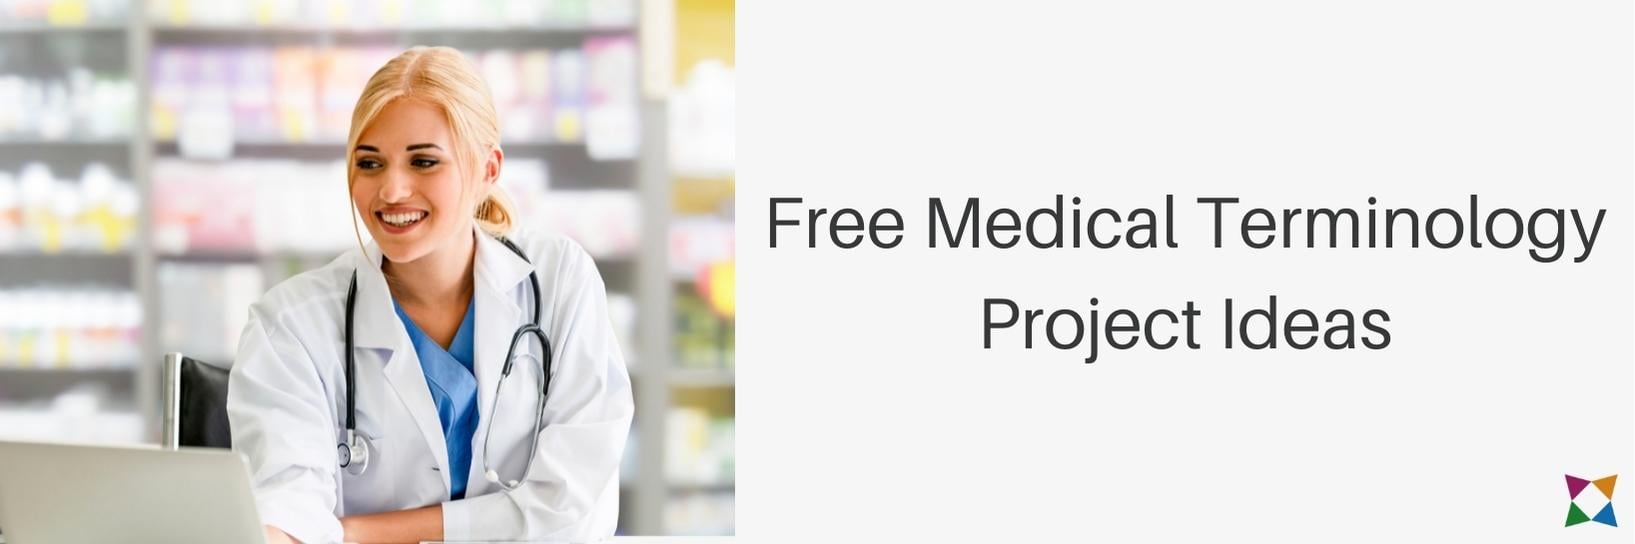 3 Best Free Medical Terminology Project Ideas